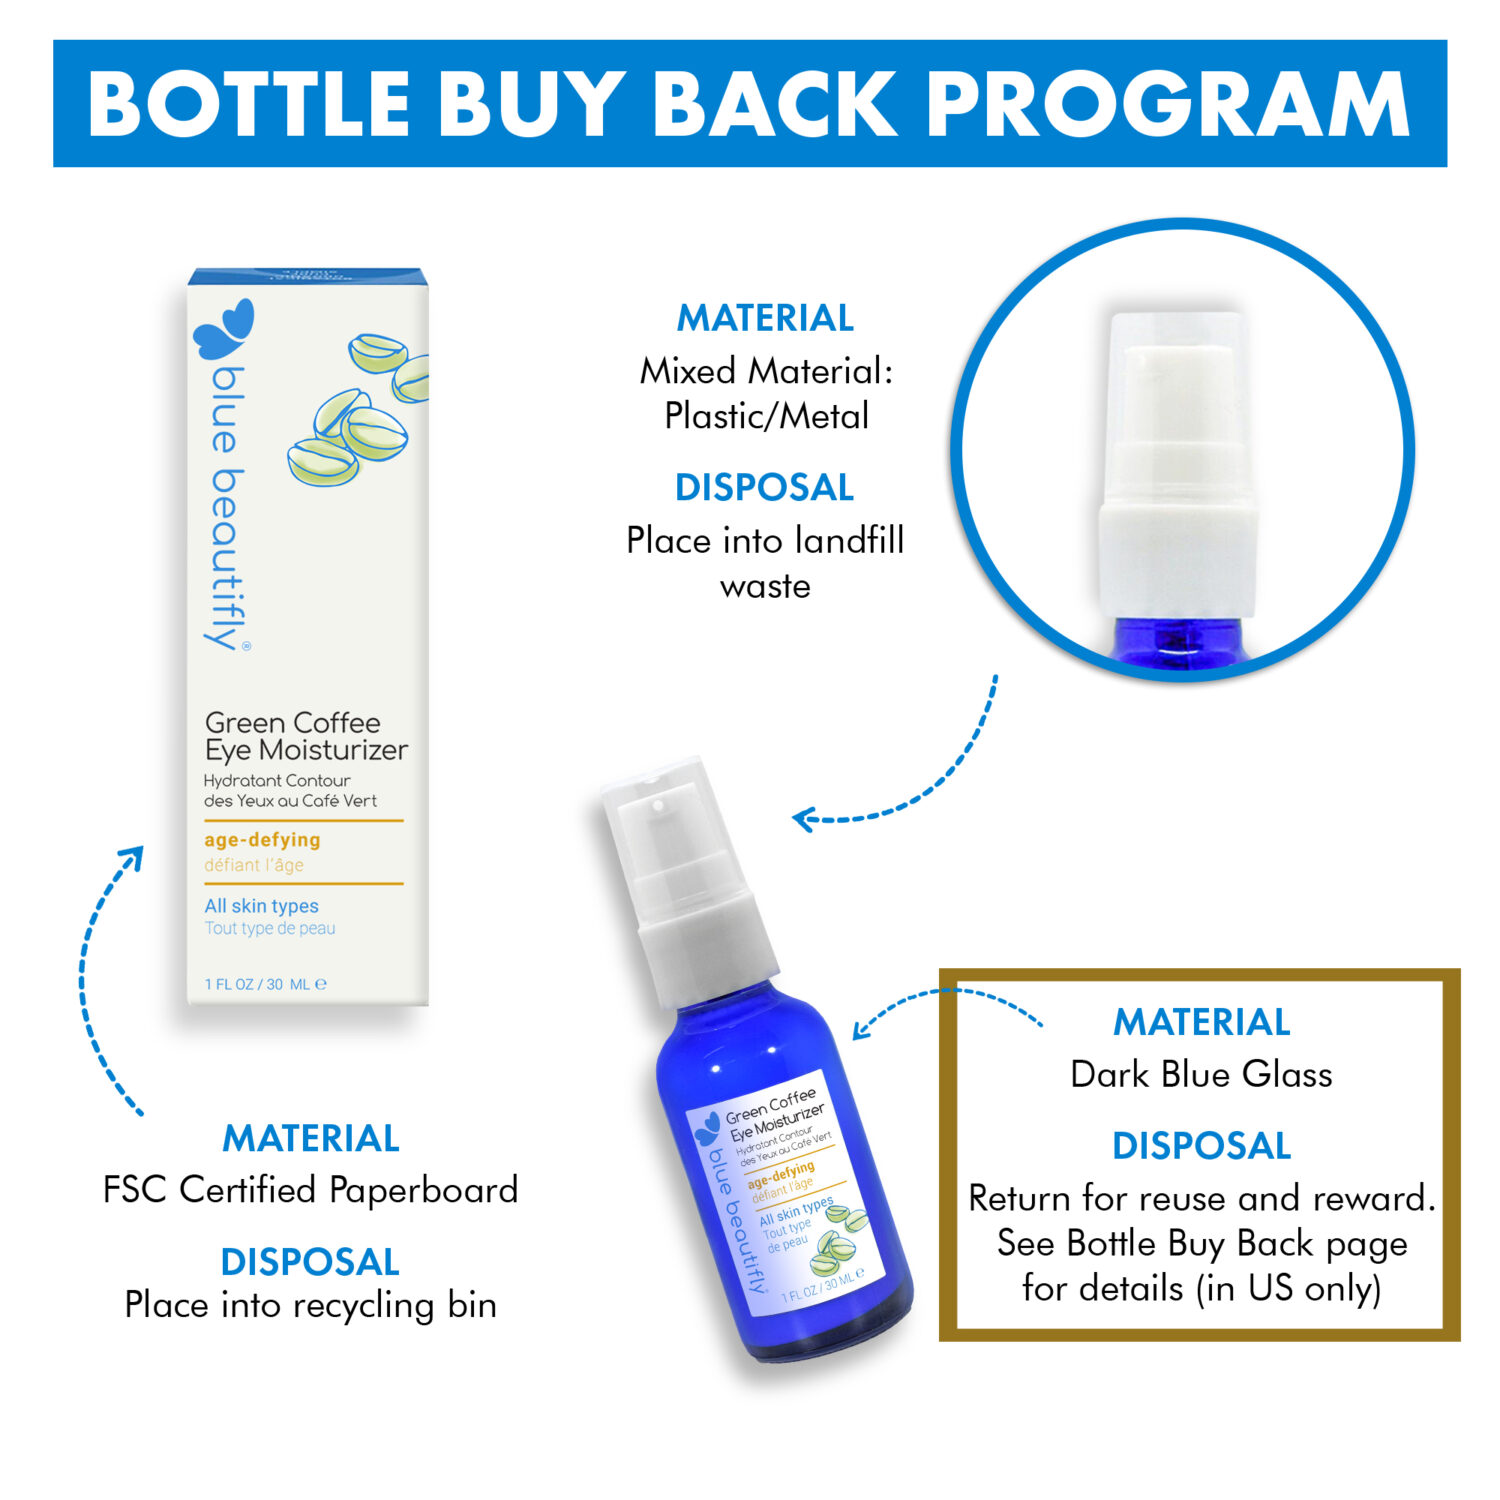 Return your empty bottle to us for reuse and earn store credit for each returned bottle